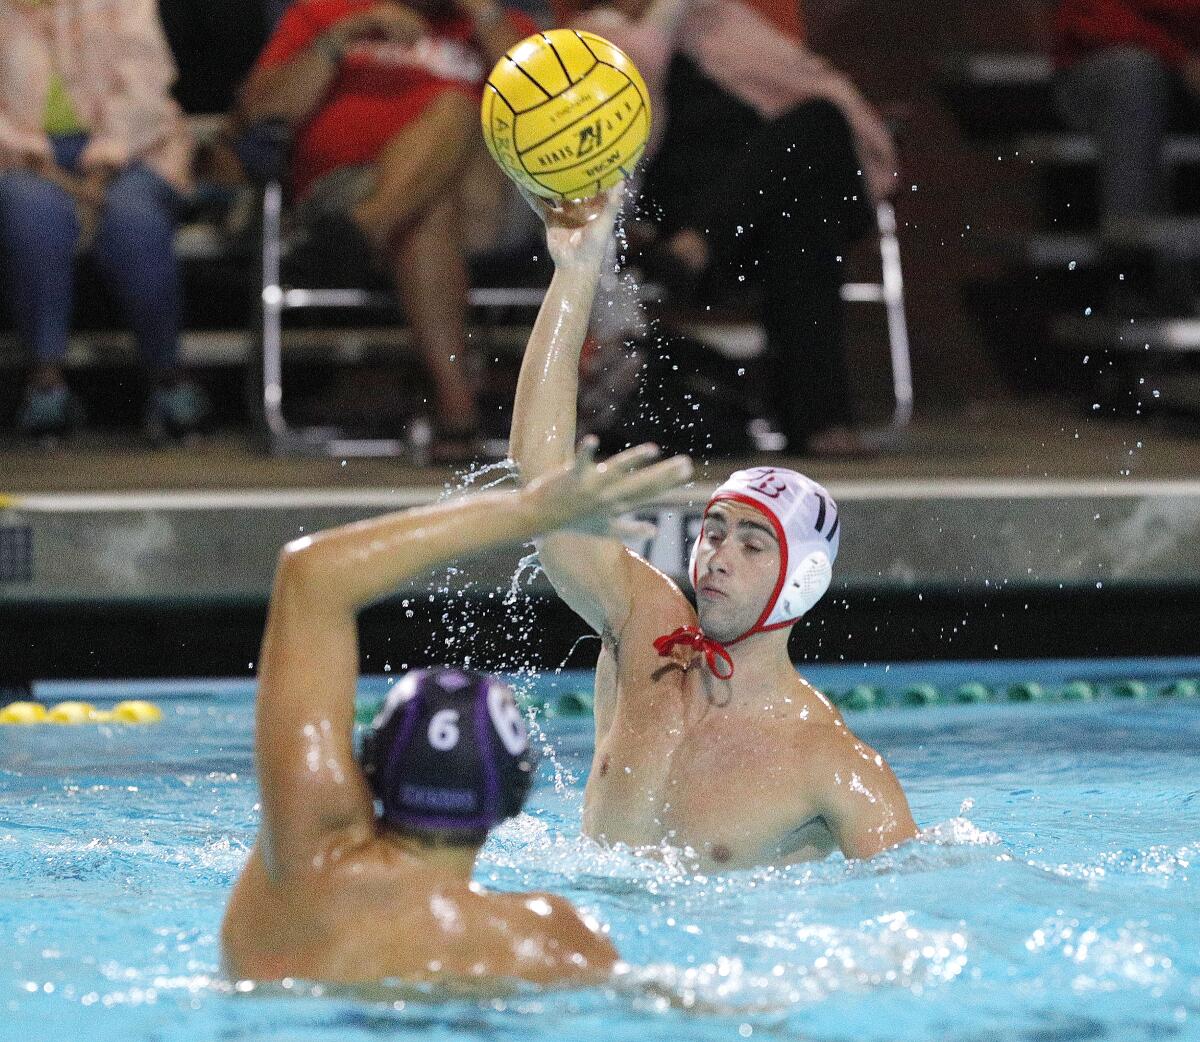 Burroughs' Chet Conlan lobs a shot that scores over the reach of Hoover's Araanm Minasyan and the Hoover goalie in the Pacific League preliminary boys' water polo tournament at Arcadia High School on Tuesday, October 29, 2019. Hoover won the game advancing to the finals.